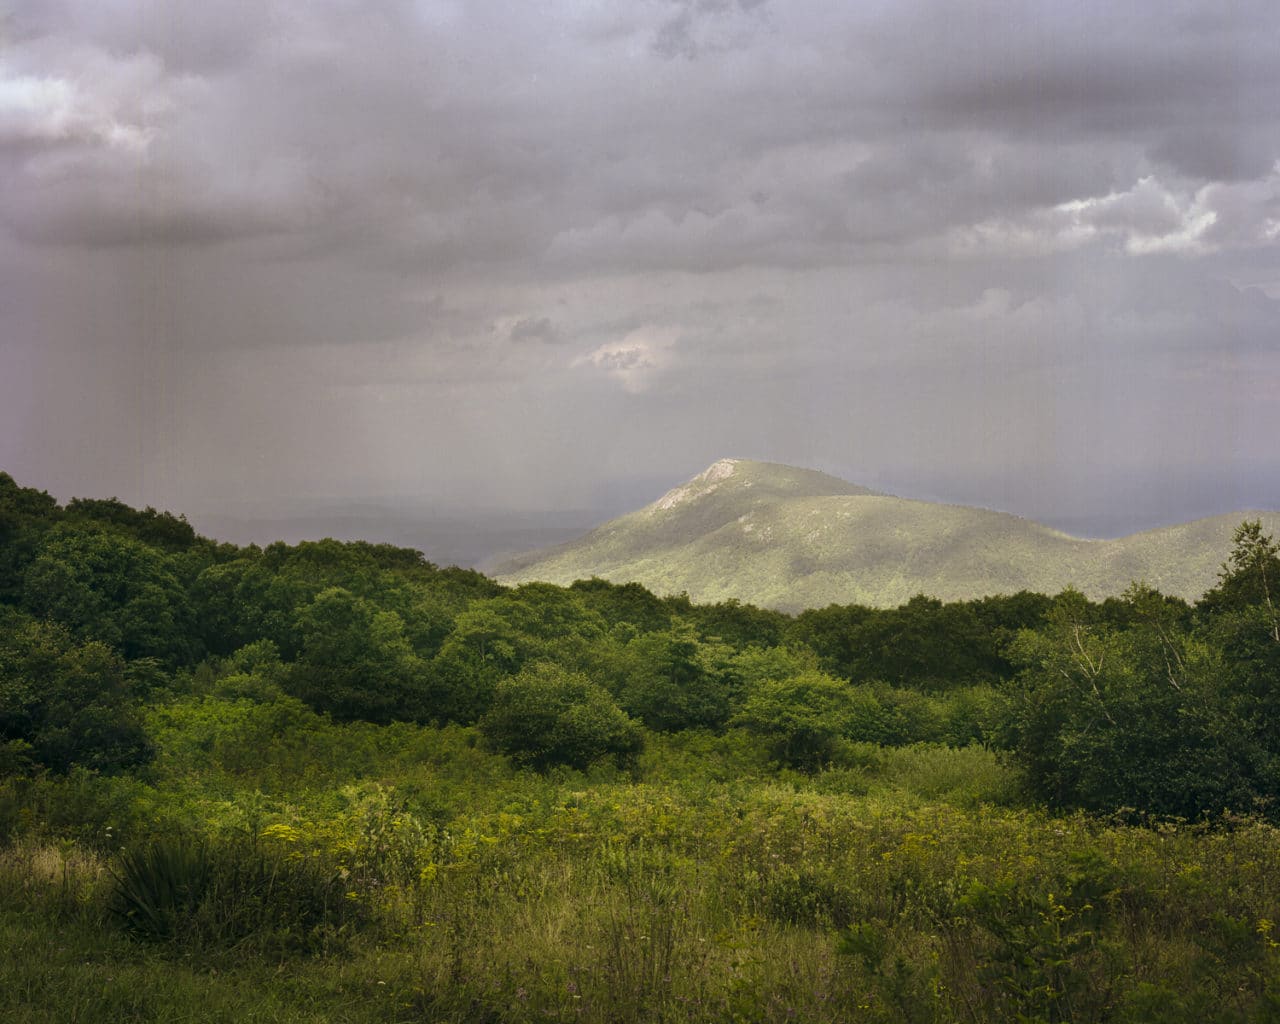 picture of Old Rag during a passing rain storm